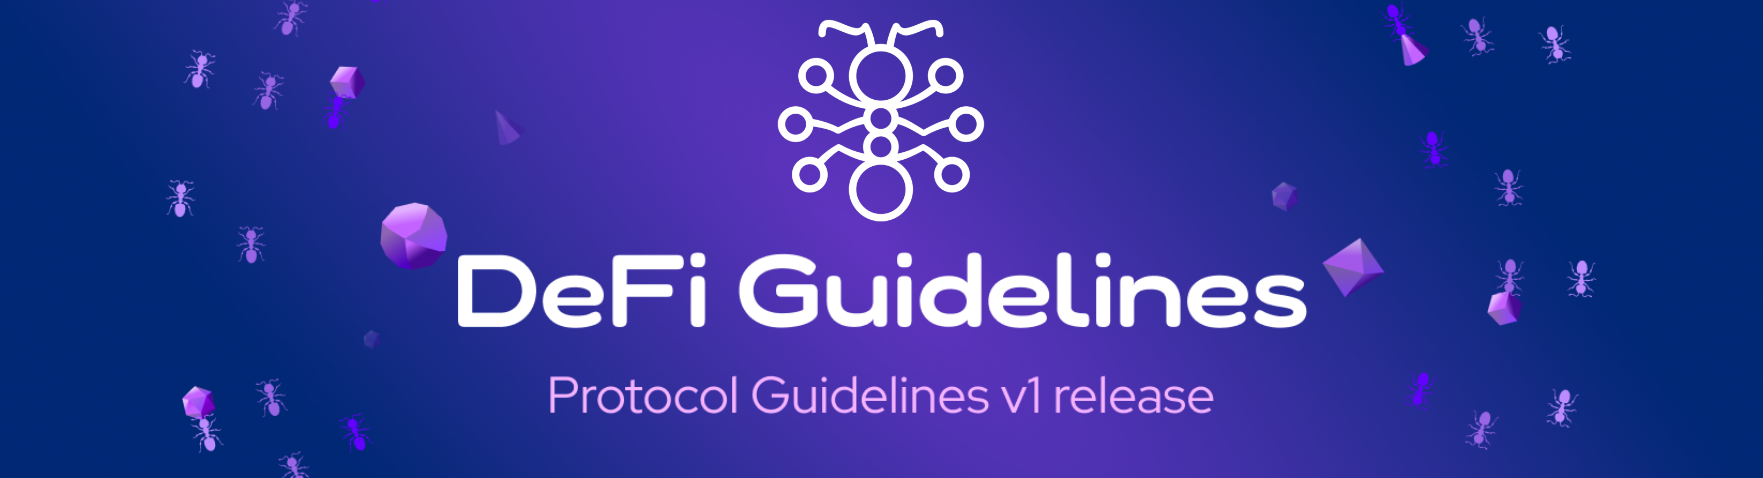 Release of the DeFi Protocol Guidelines